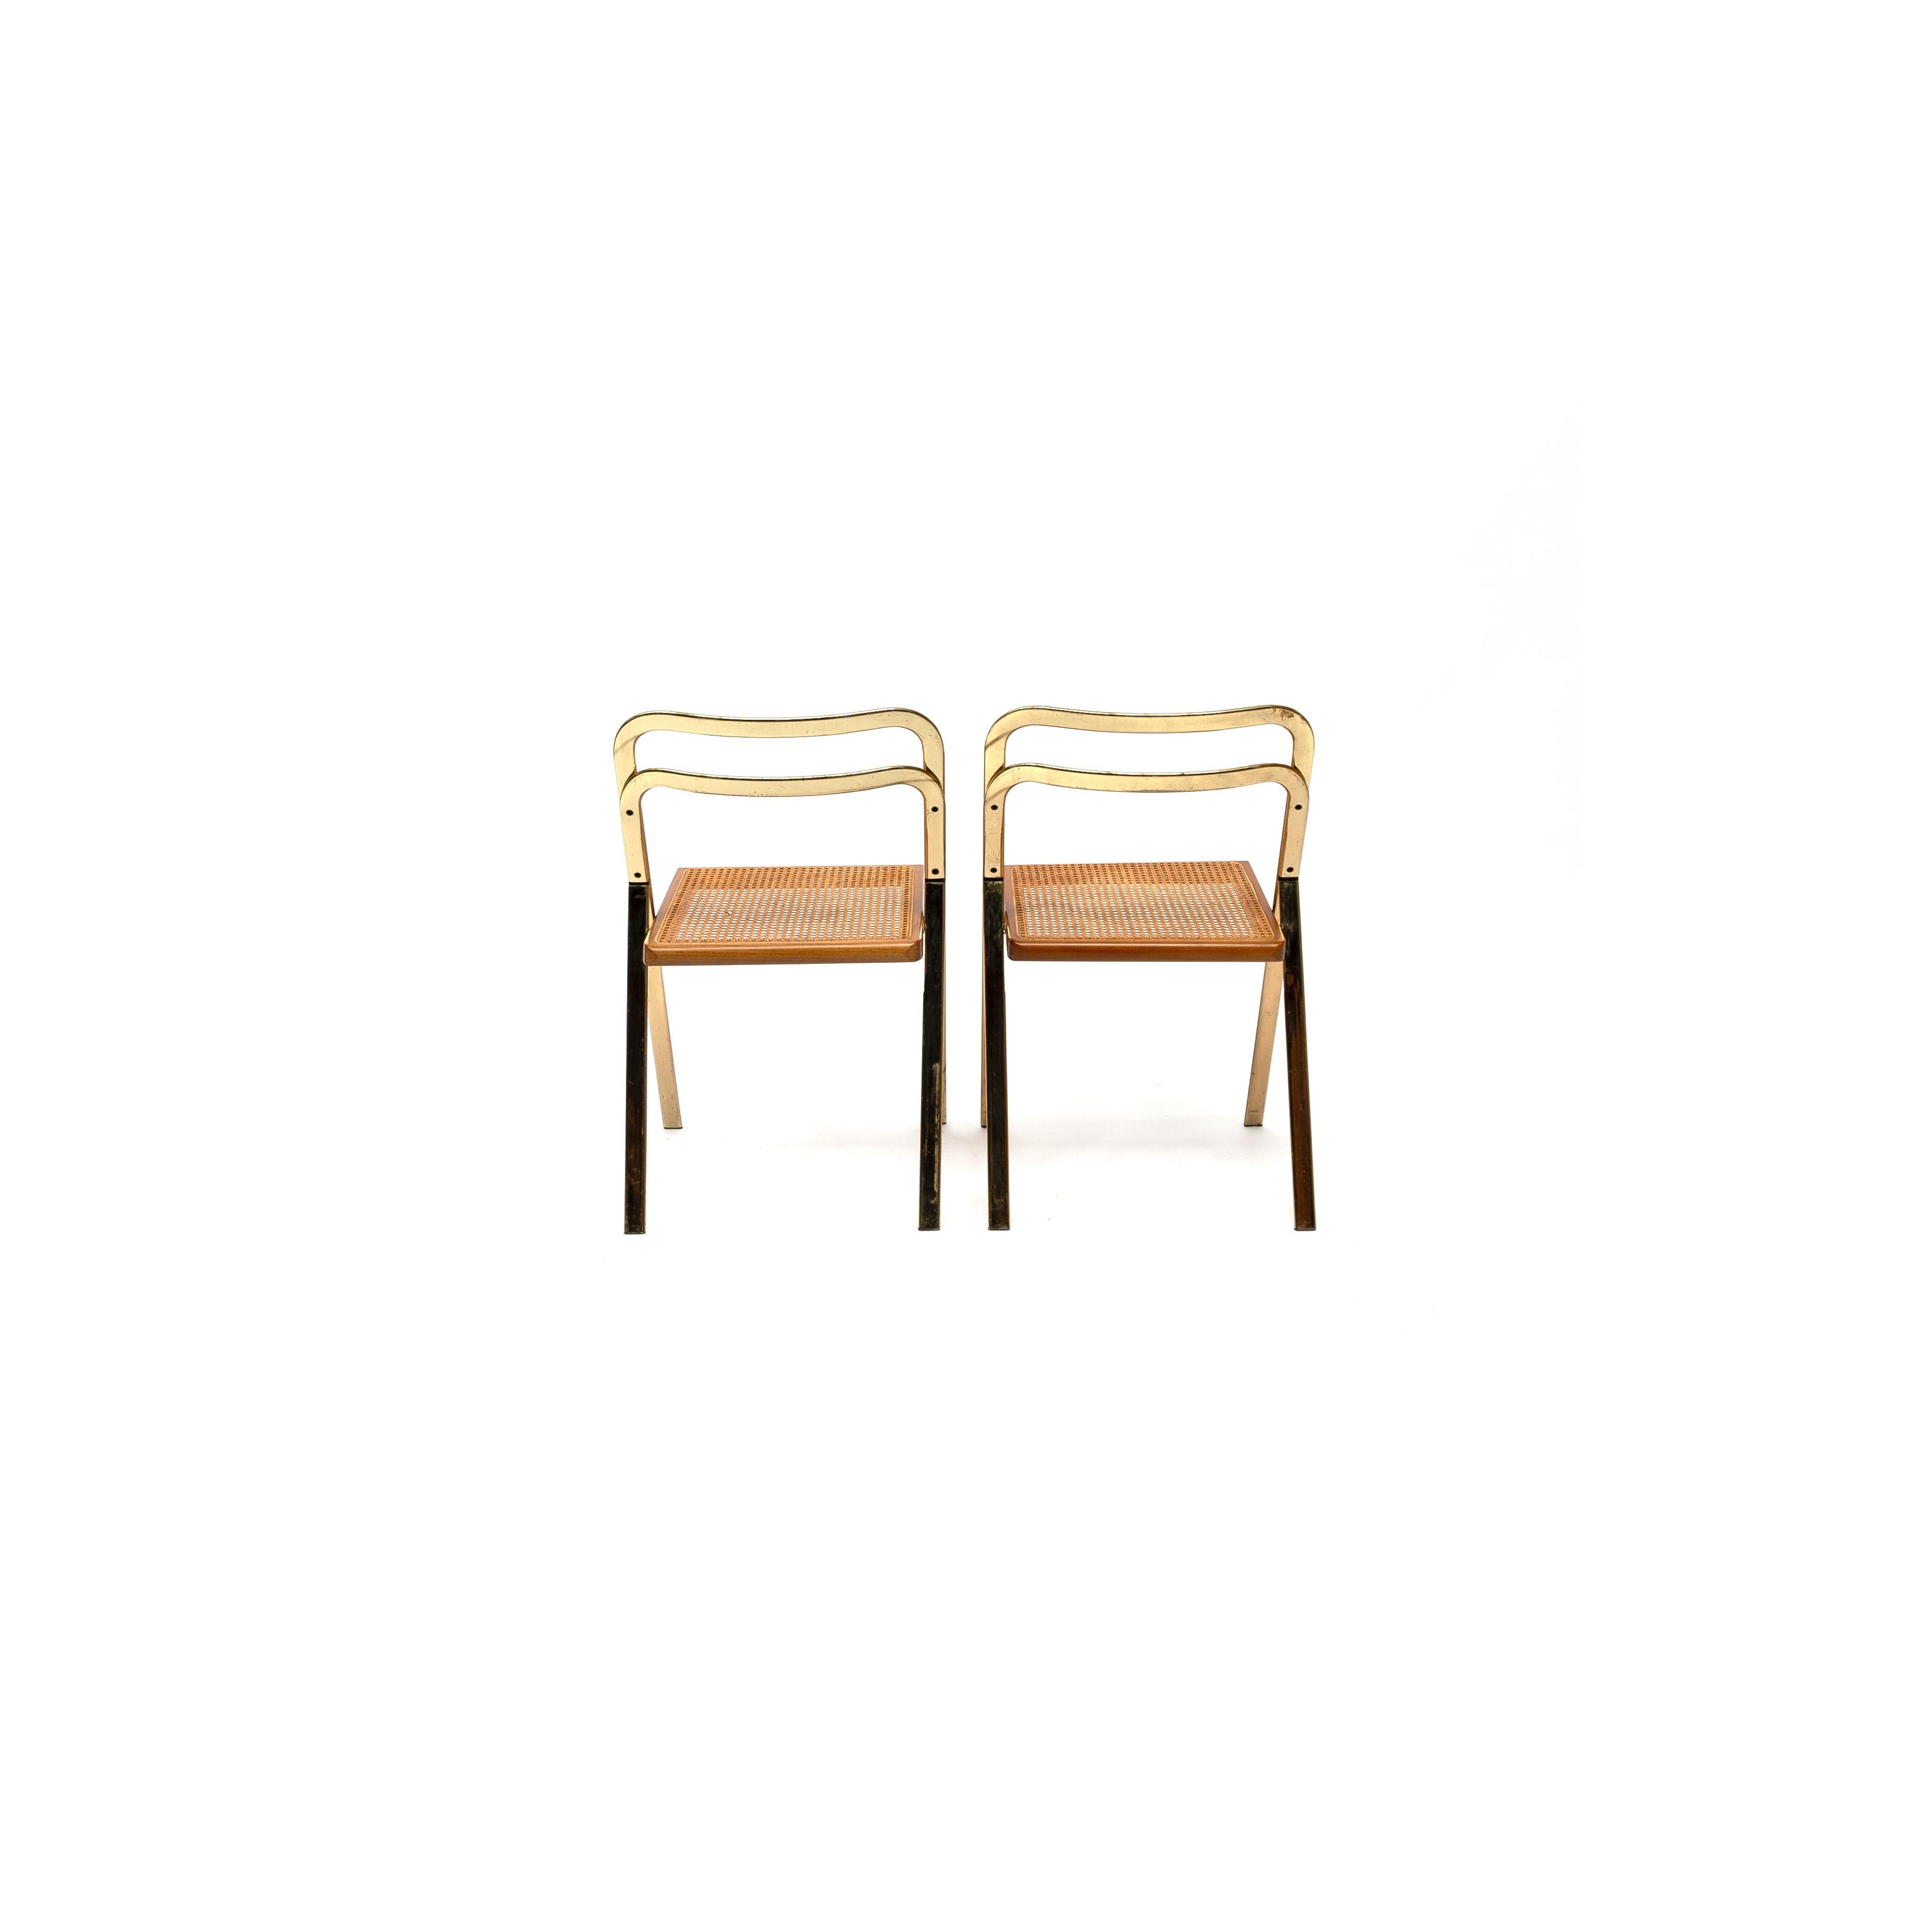 Late 20th Century Italian Folding Chairs by Giorgio Cattelan for Cidue, 1970s